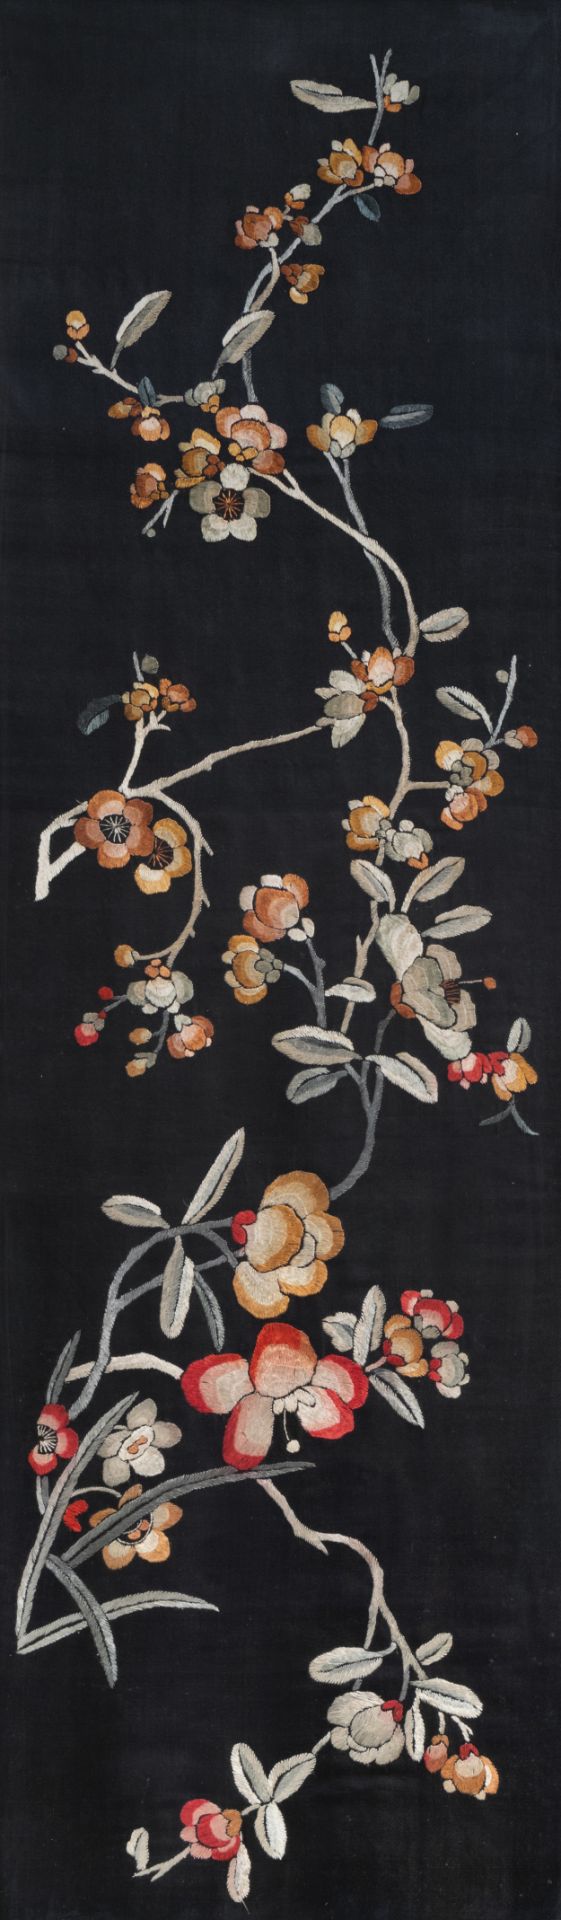 Two Chinese embroidered silk panels with floral designs, 19th/20th C. - Image 5 of 7